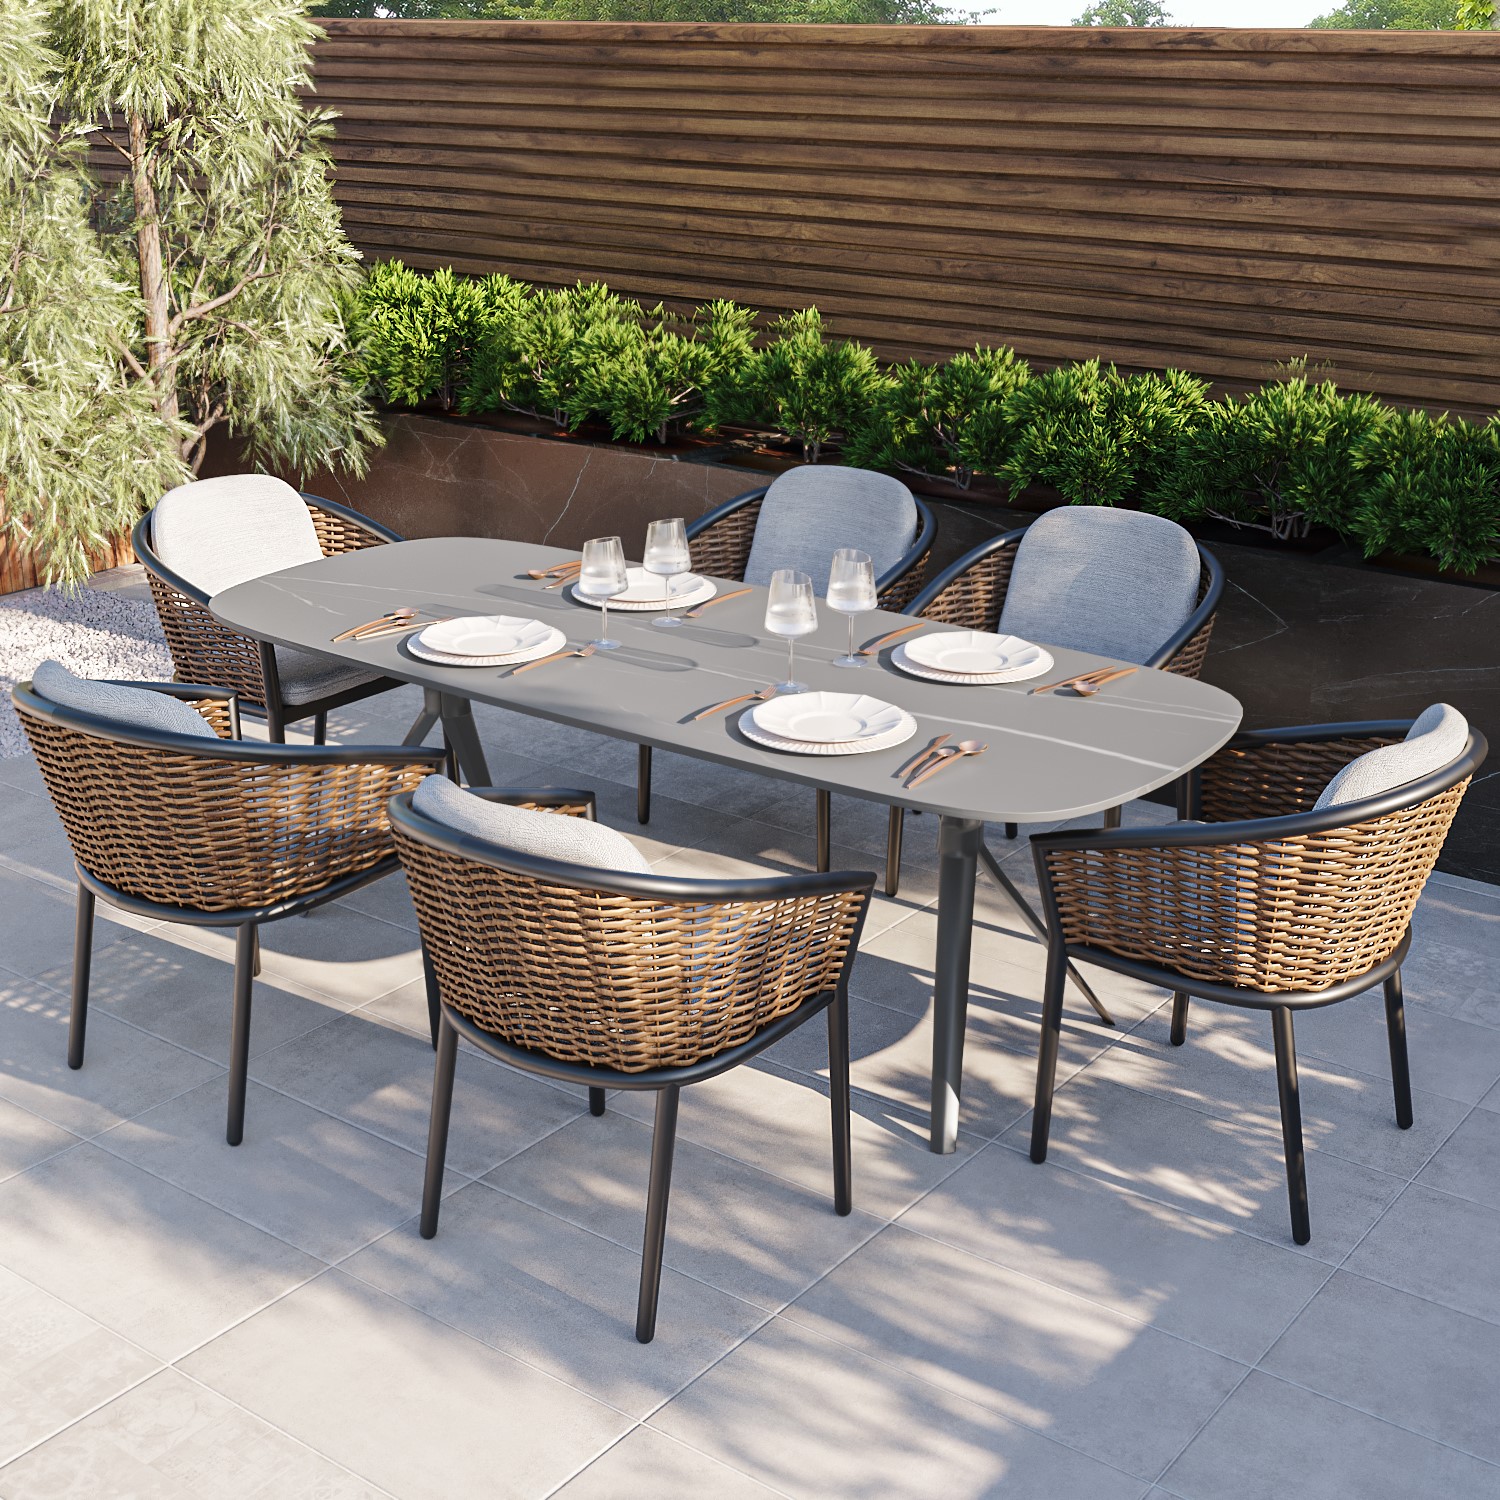 Photo of 6 seater garden dining set with woven wicker chairs & stone table top